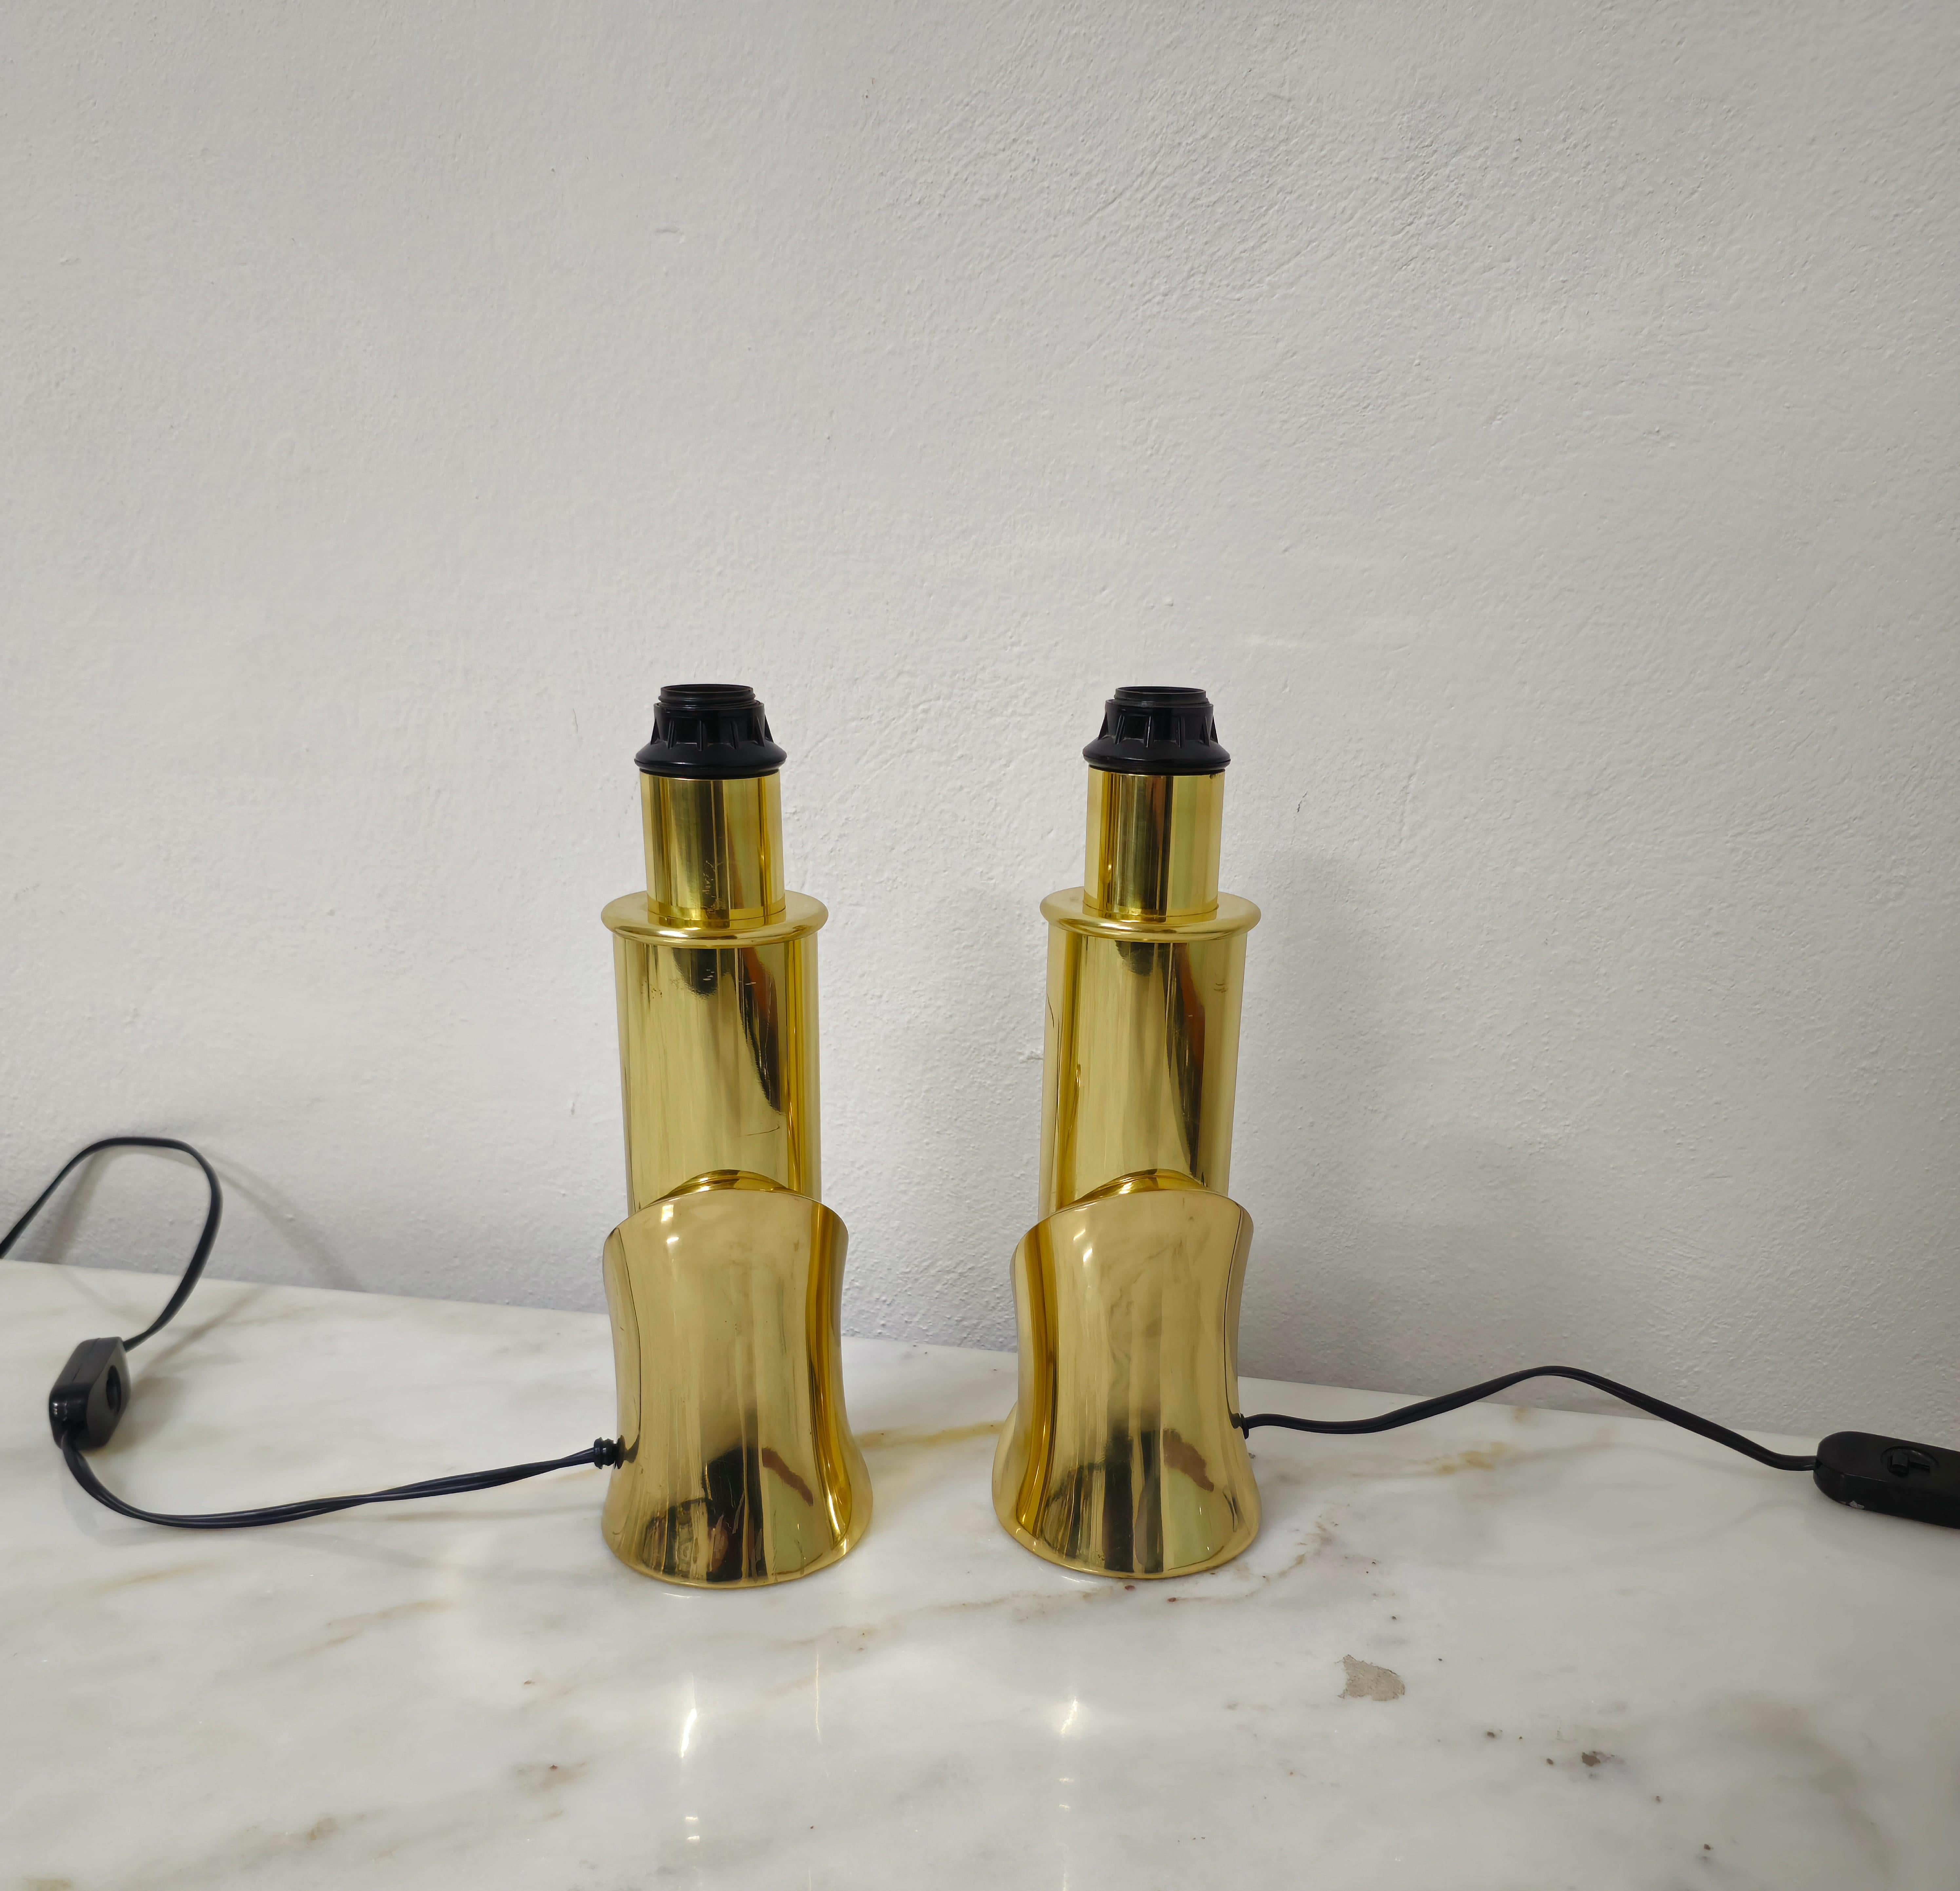 Pair of Table Lamps Bedside Lamps Brass Luciano Frigerio Italian Design 1970s  For Sale 6